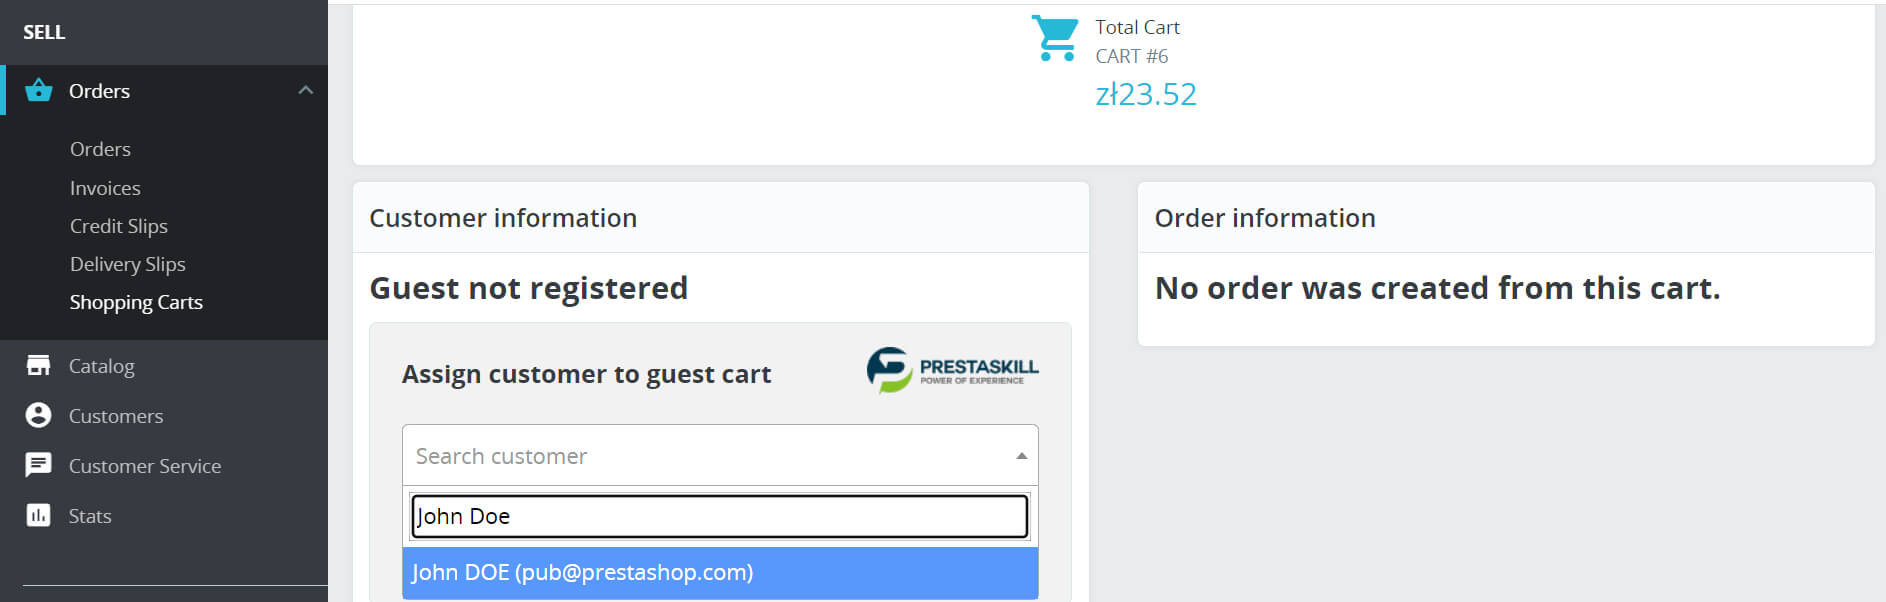 How to assign an unregistered visitor's abandoned cart to a customer in Prestashop 1.7?